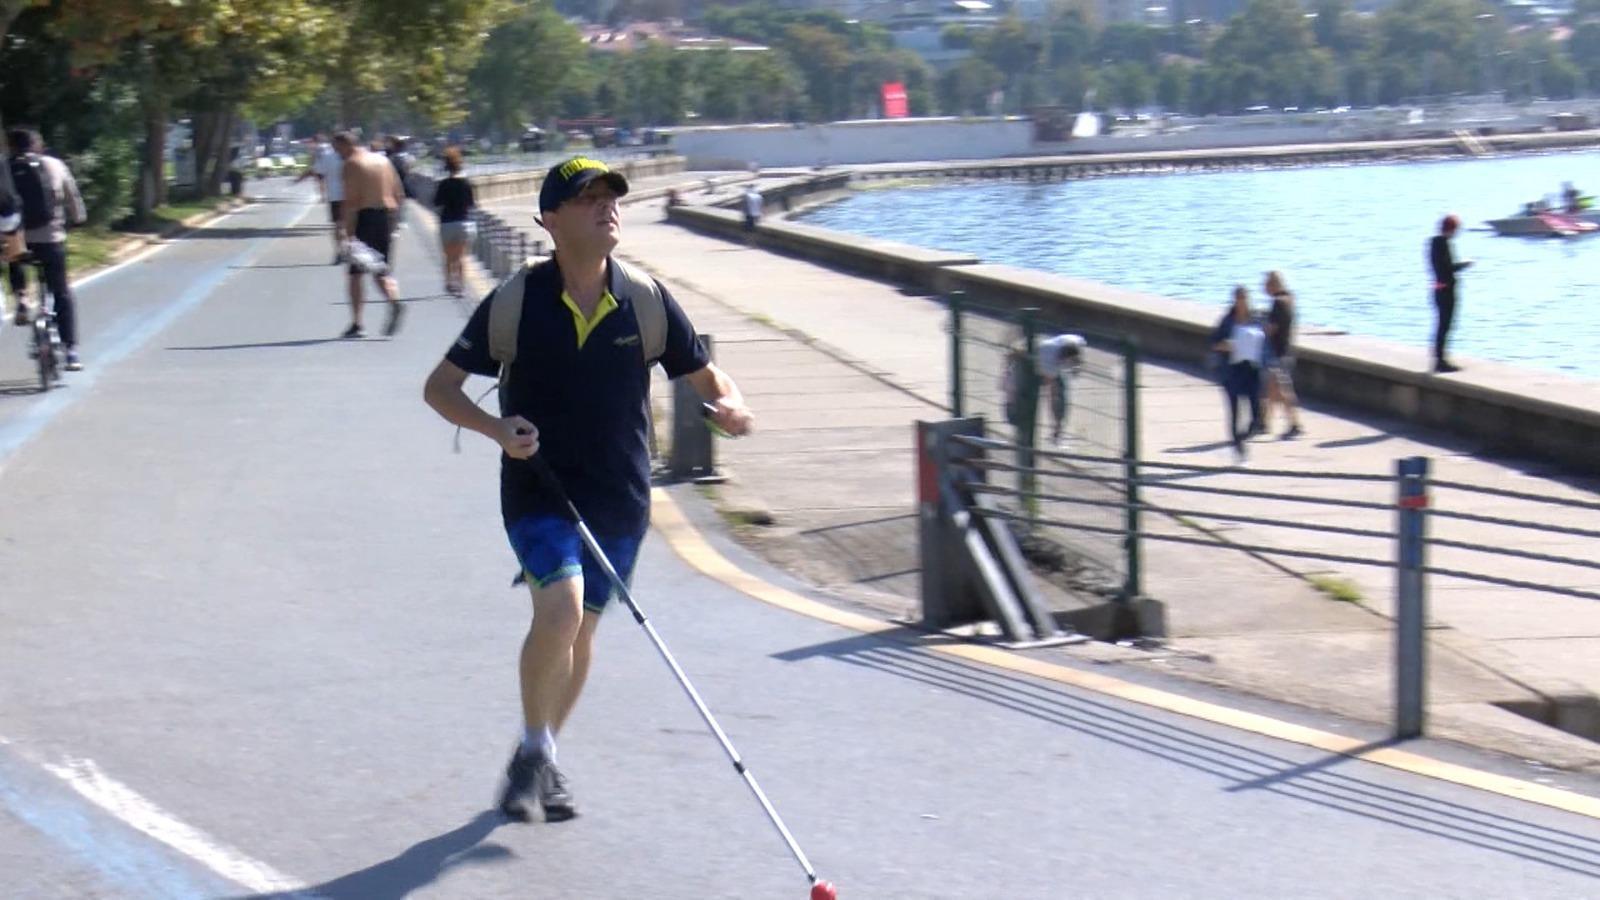 Runs 14 kilometers a day with his cane and bell despite his visual impairment